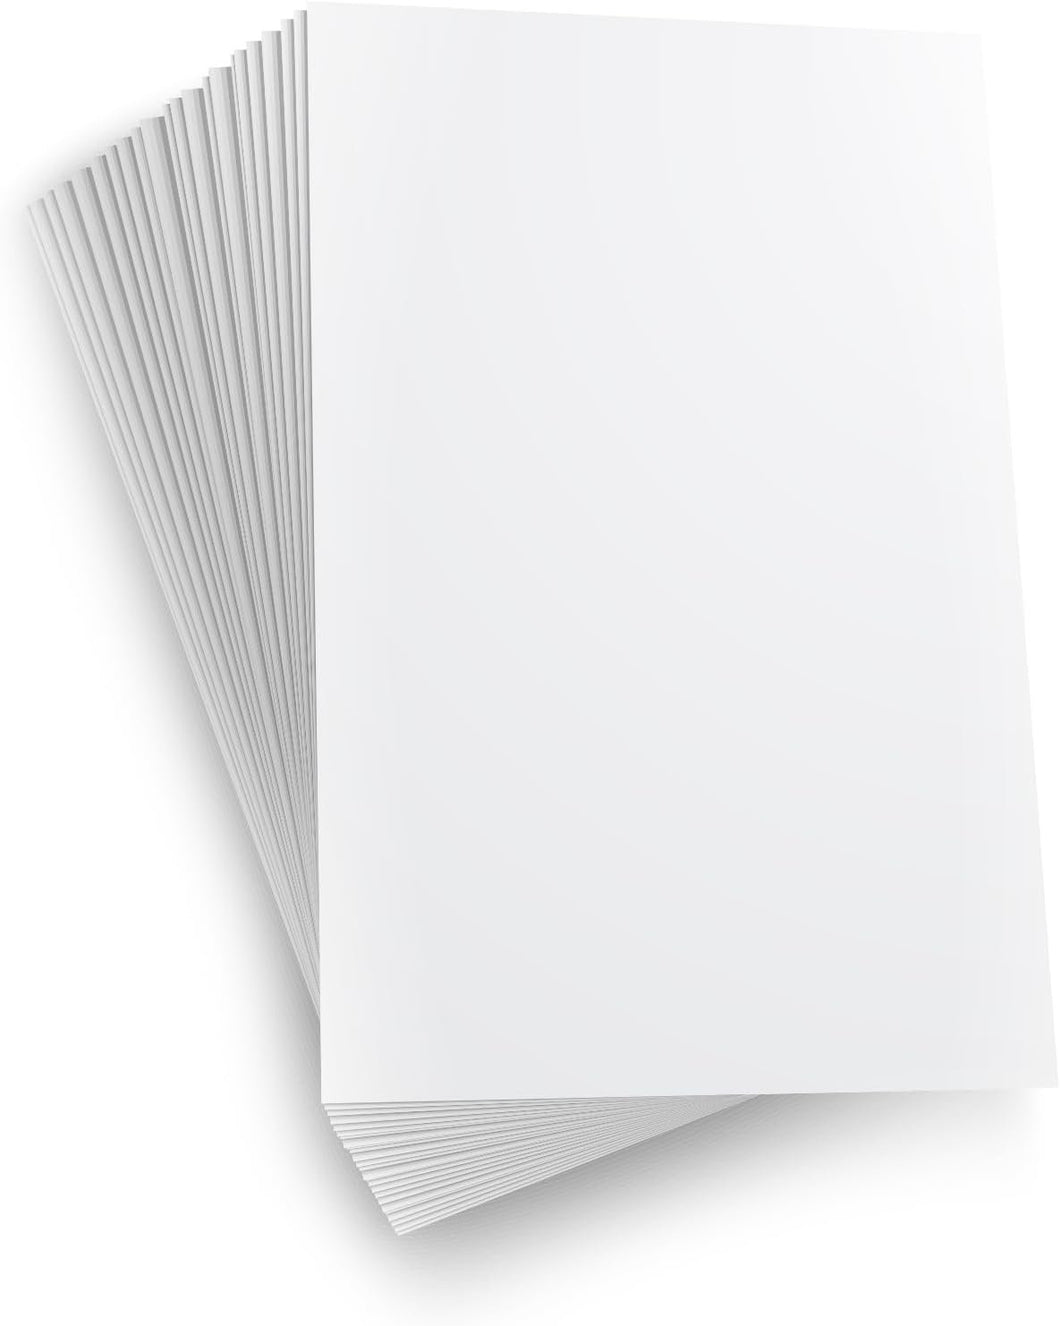 White Cardstock Printer Paper By Hamilco (50-Pack)- 8.5 x 11” Thick Ca –